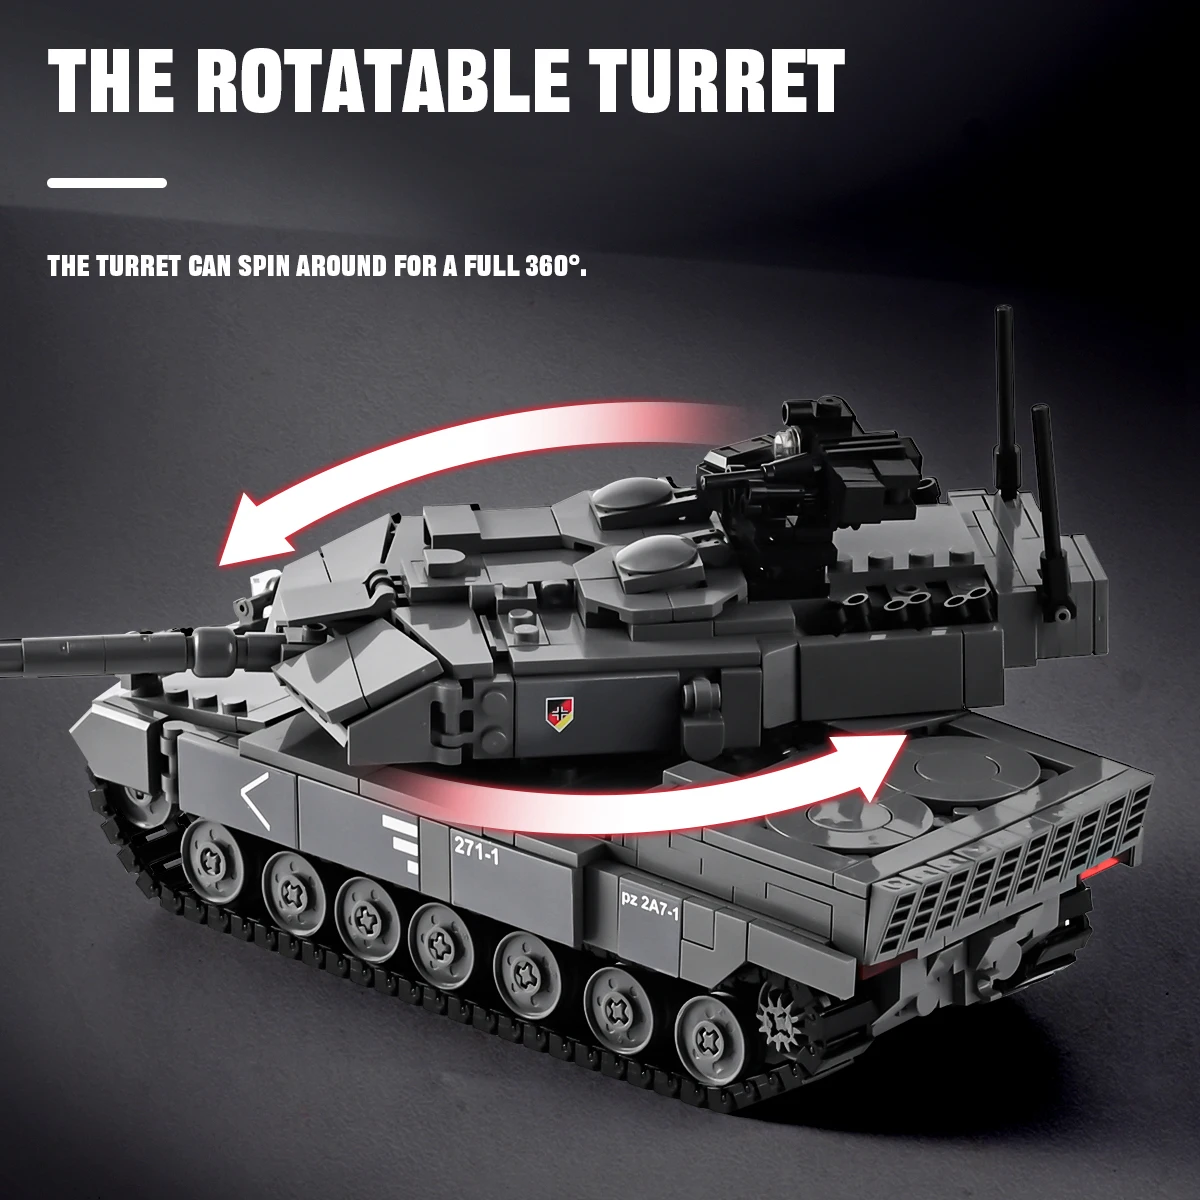 Play Military Tanks Challenger Leopard 2A7+ Main Battle Tank Soldier Police Buil - $83.00